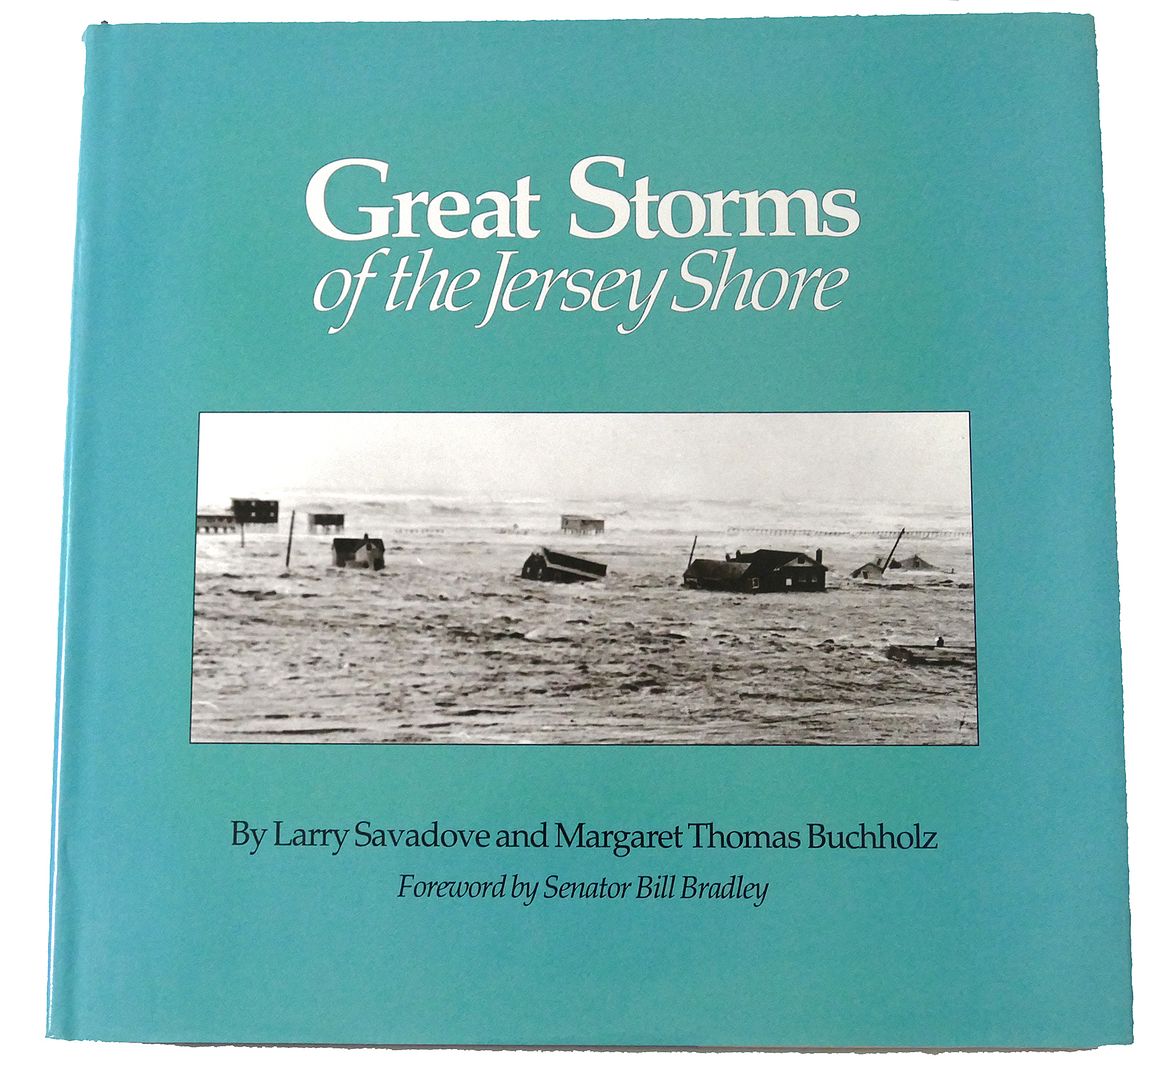 LARRY SAVADOVE, MARGARET THOMAS BUCHHOLZ - Great Storms of the Jersey Shore